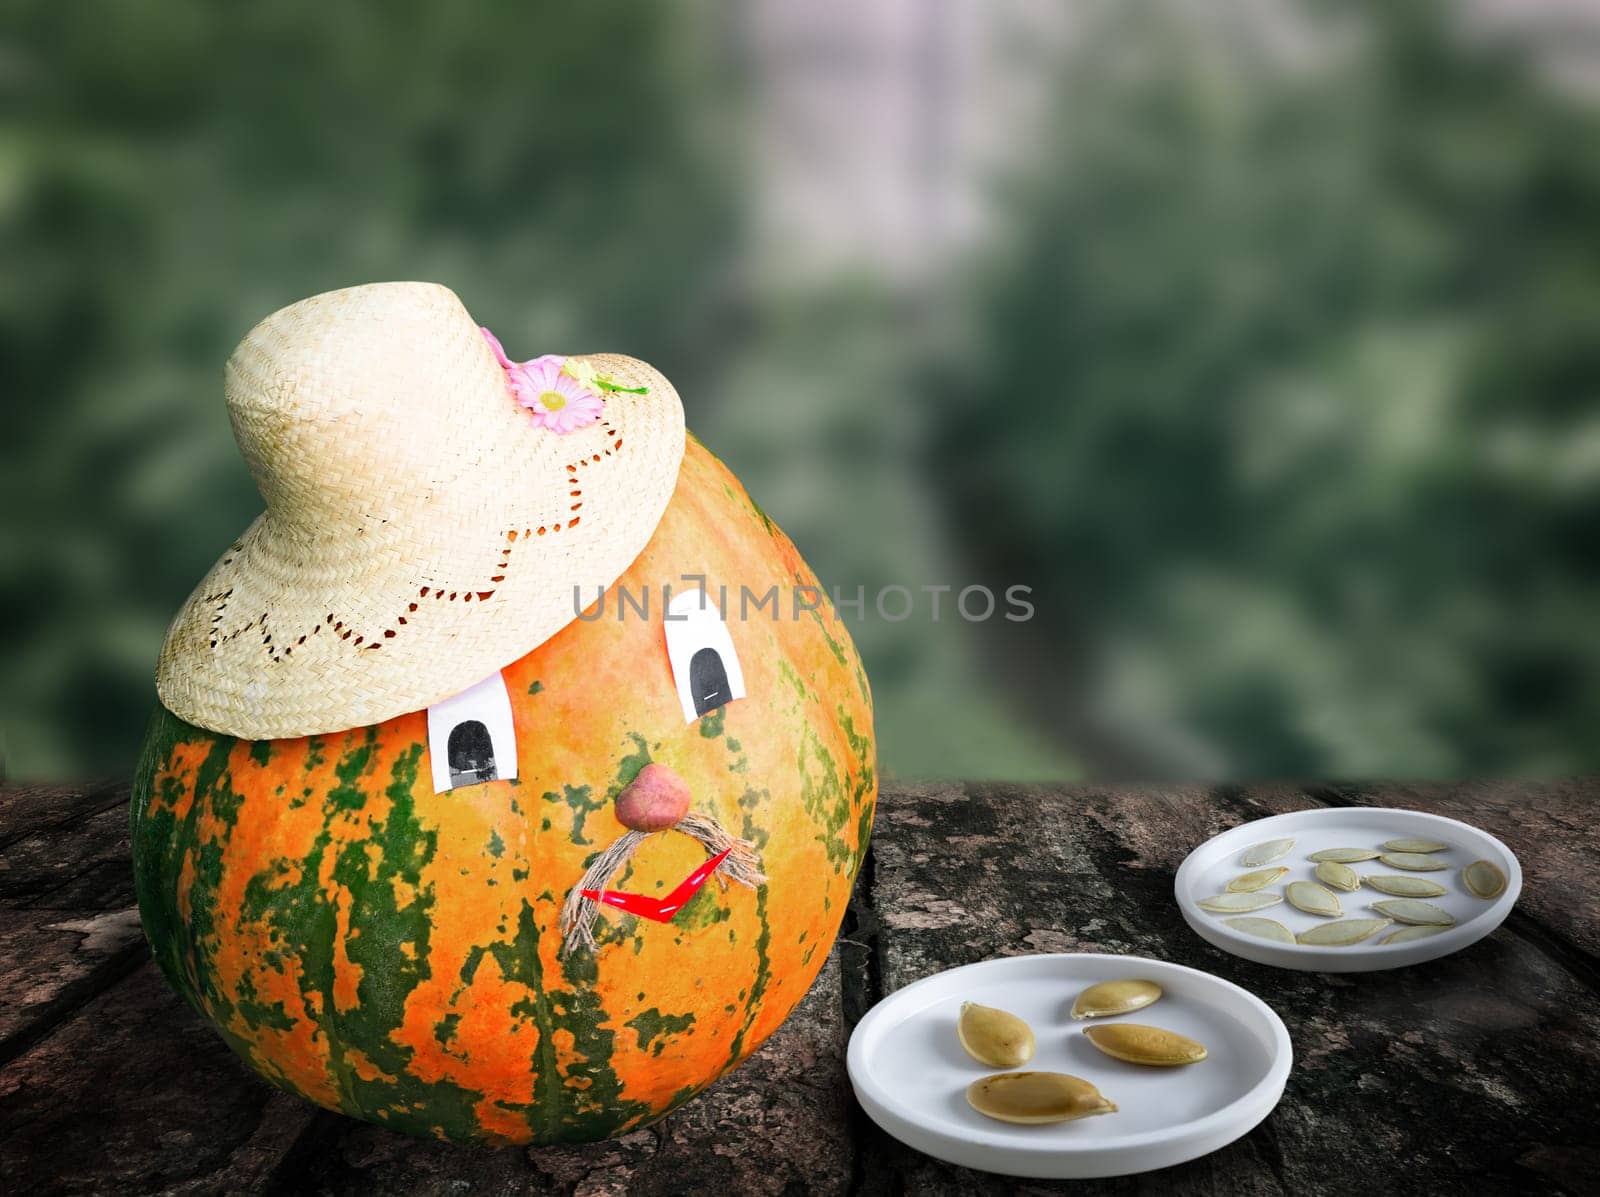 Seeds and fruits of a pumpkin on blurred background of the greenhouse. by georgina198